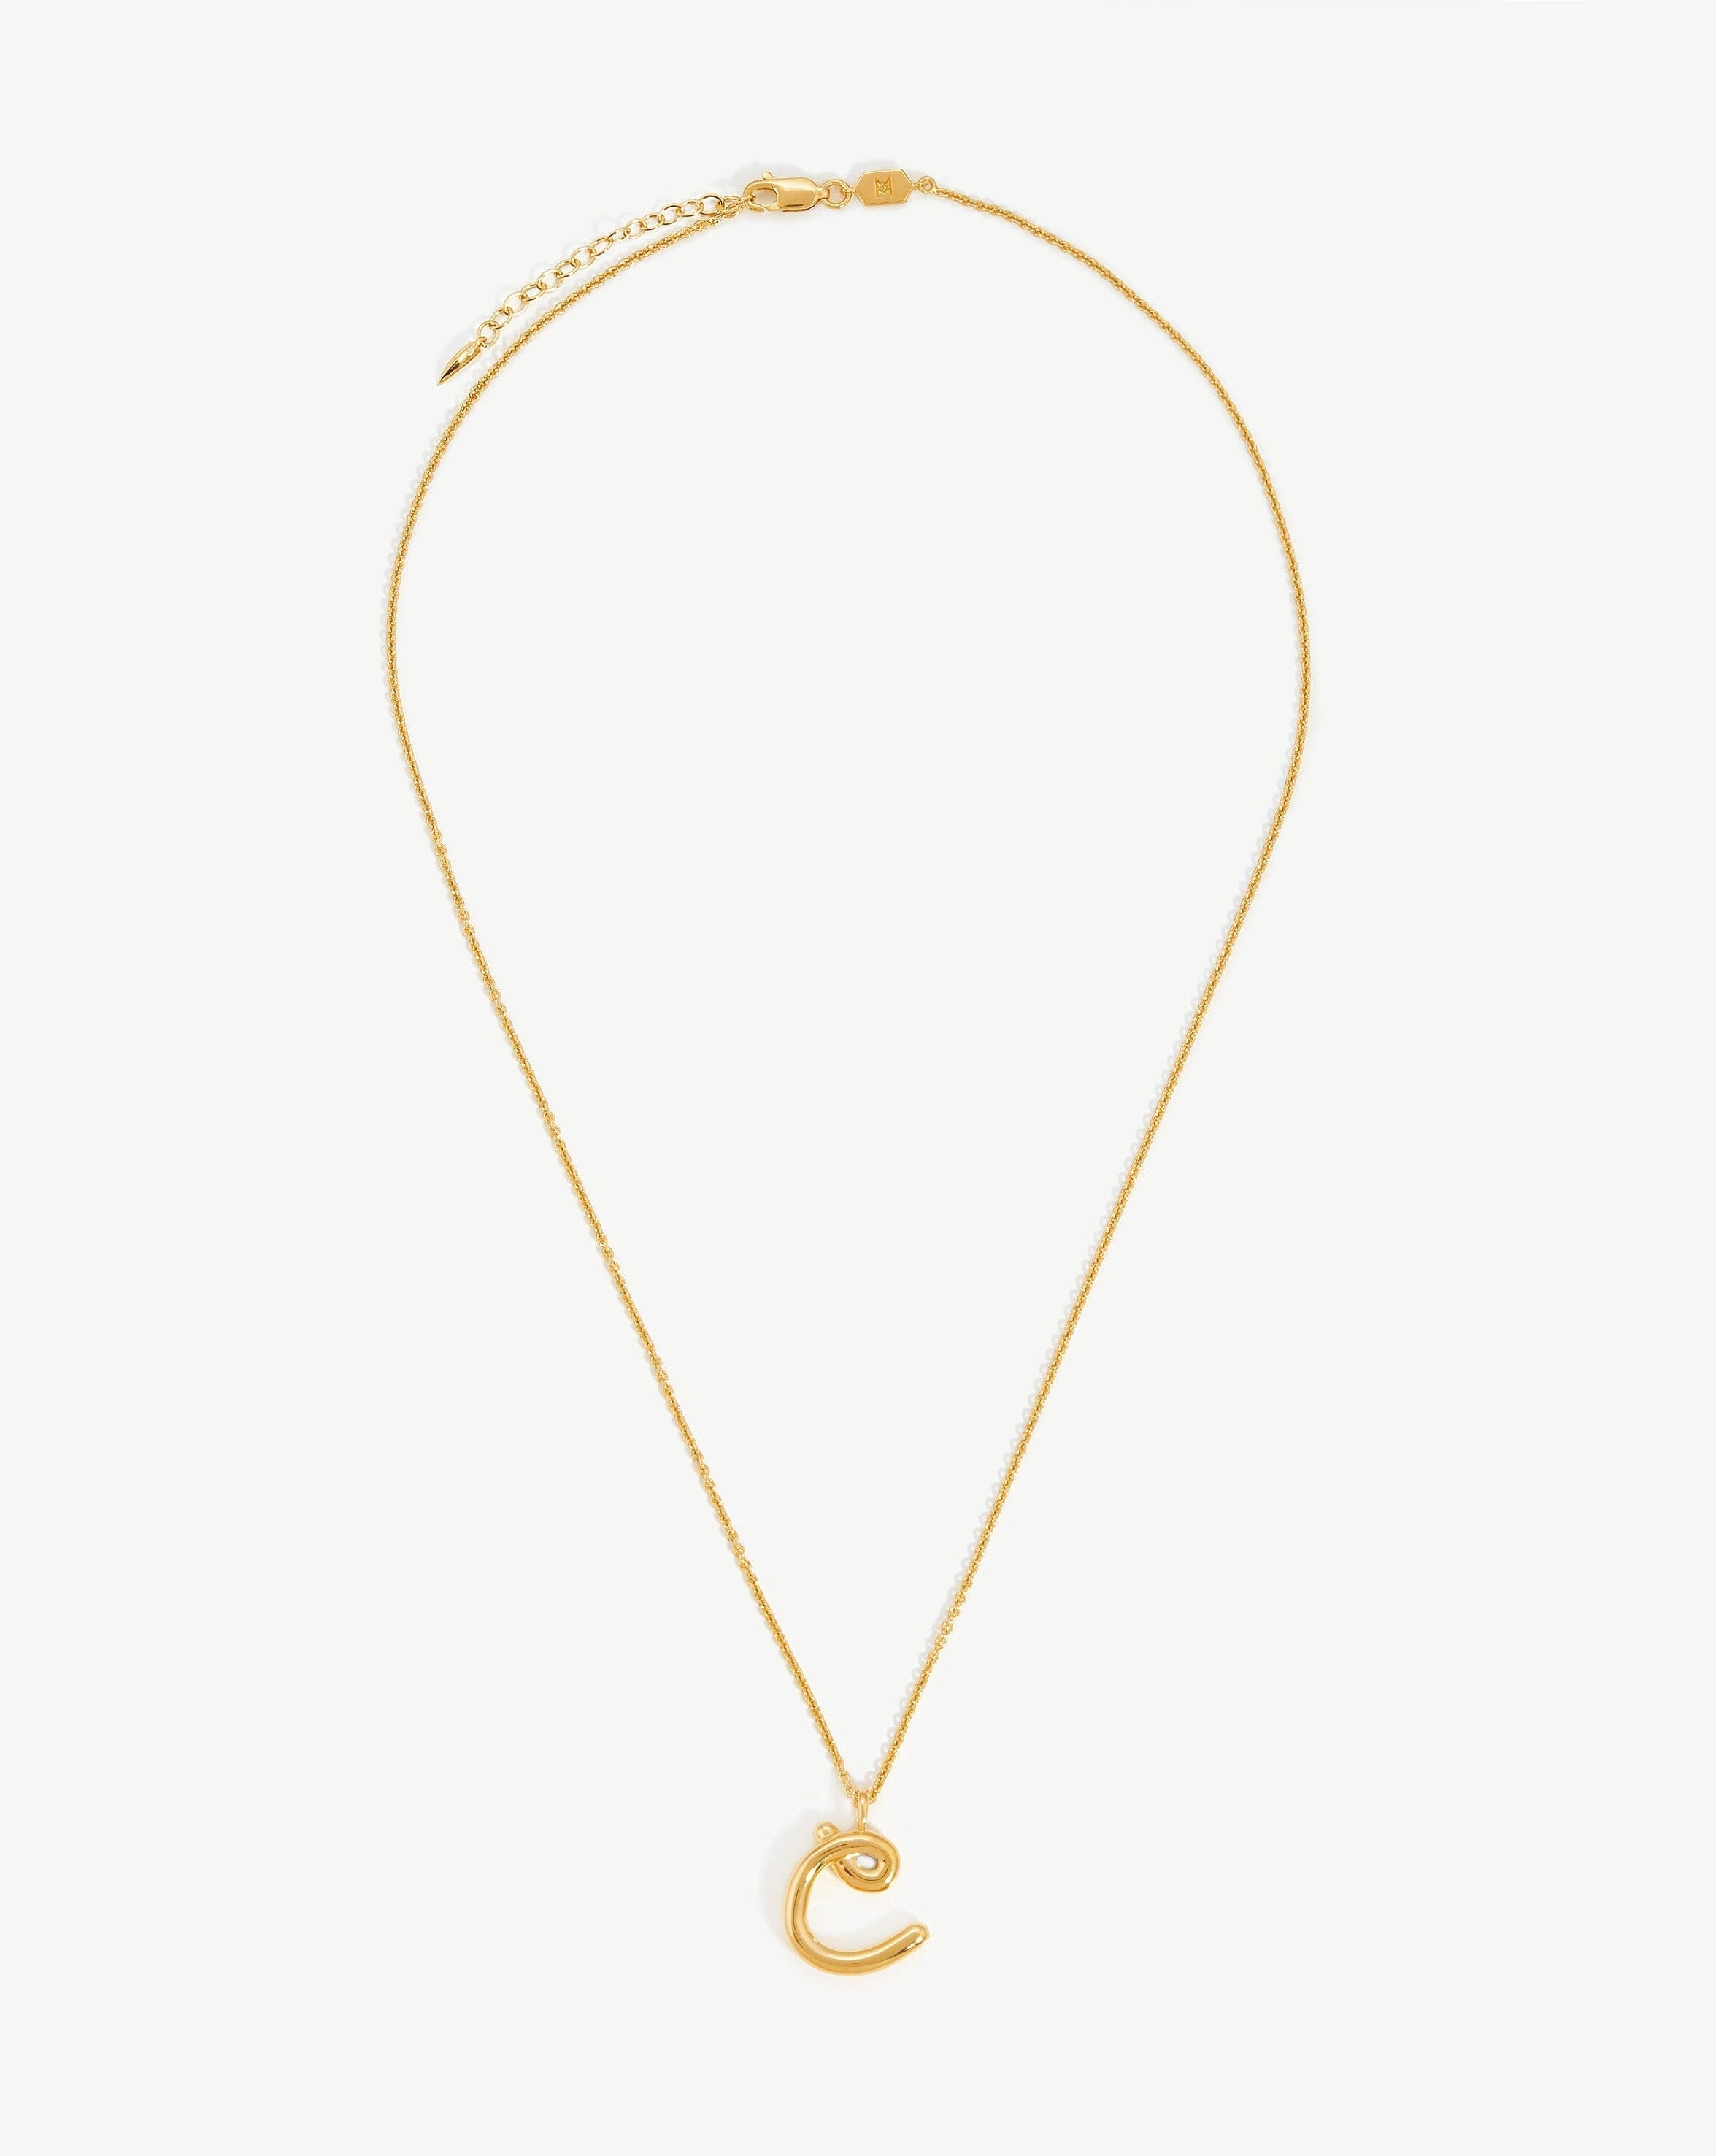 Curly Molten Initial Pendant Necklace - Initial C | 18ct Gold Plated Vermeil Necklaces Missoma 